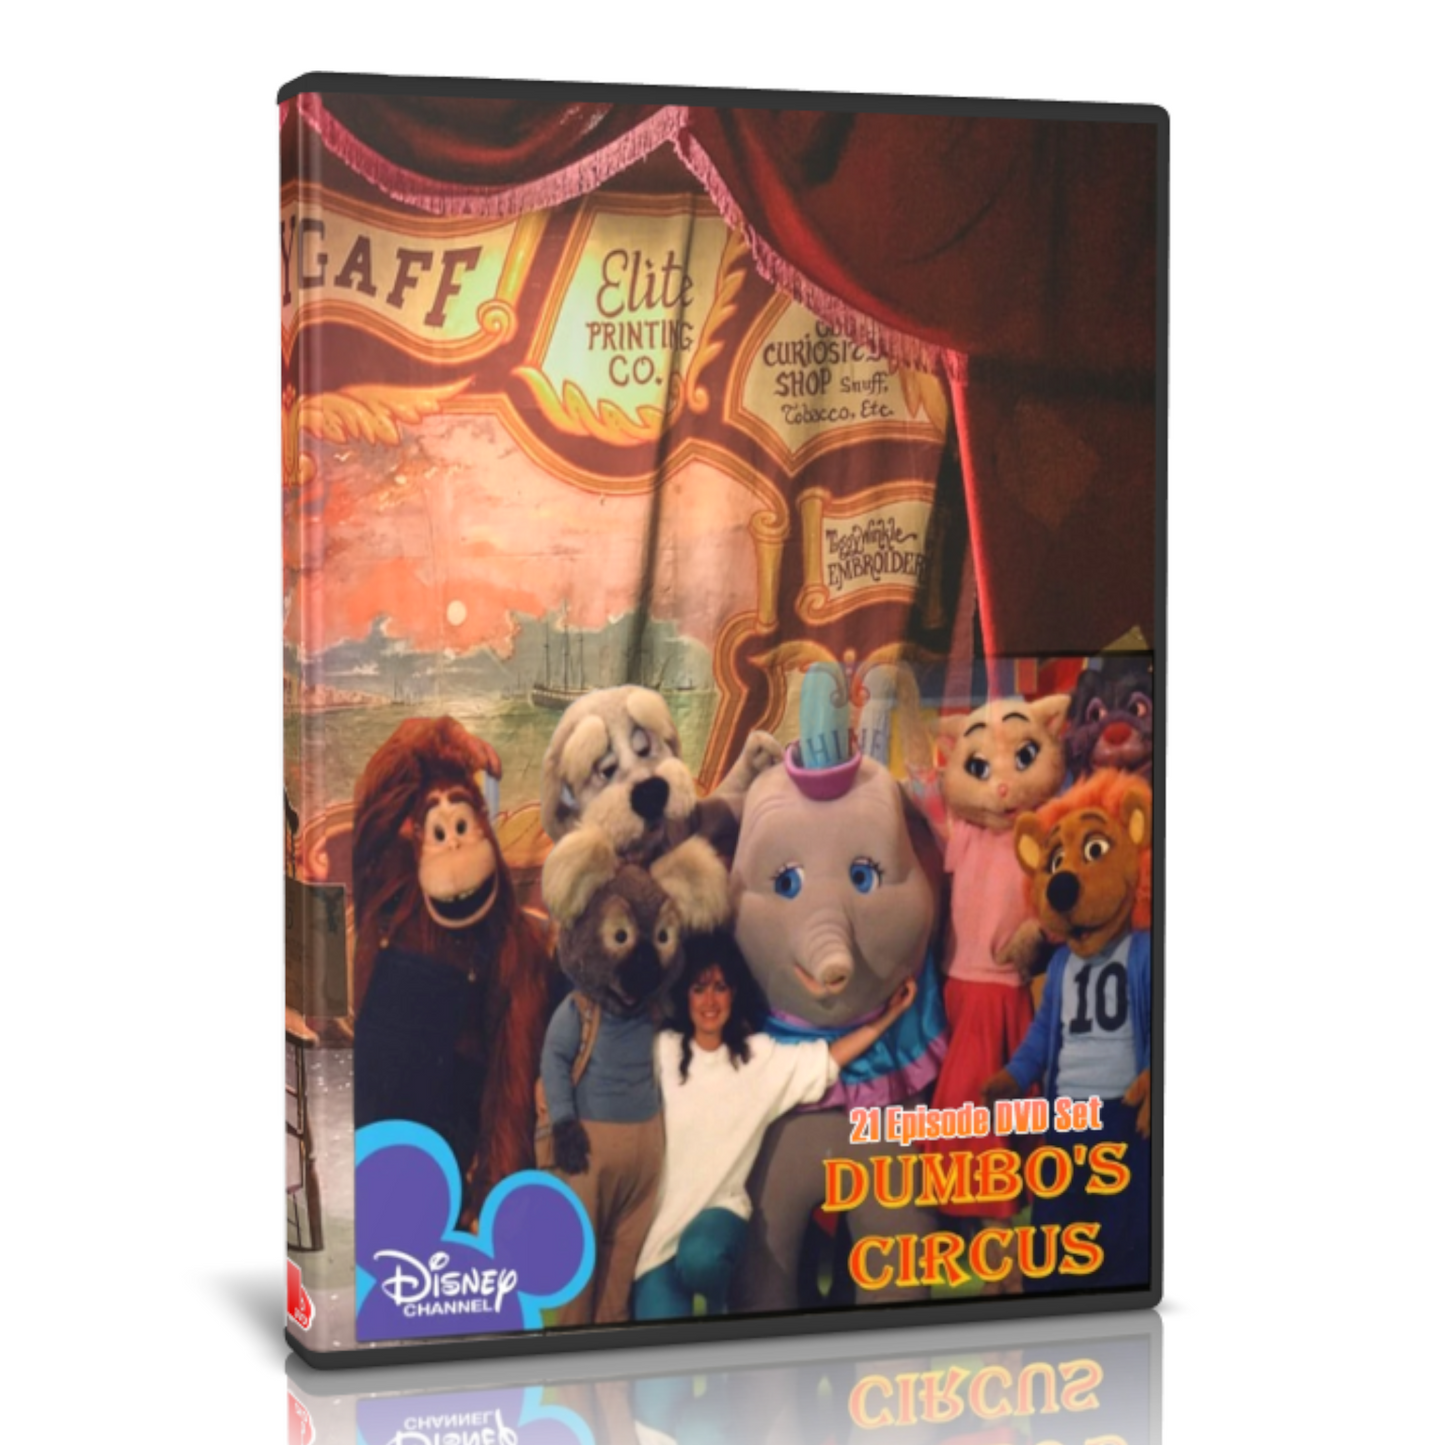 Dumbo's Circus -  21 Episode Series Collection DVD Set - RetroAnimation 